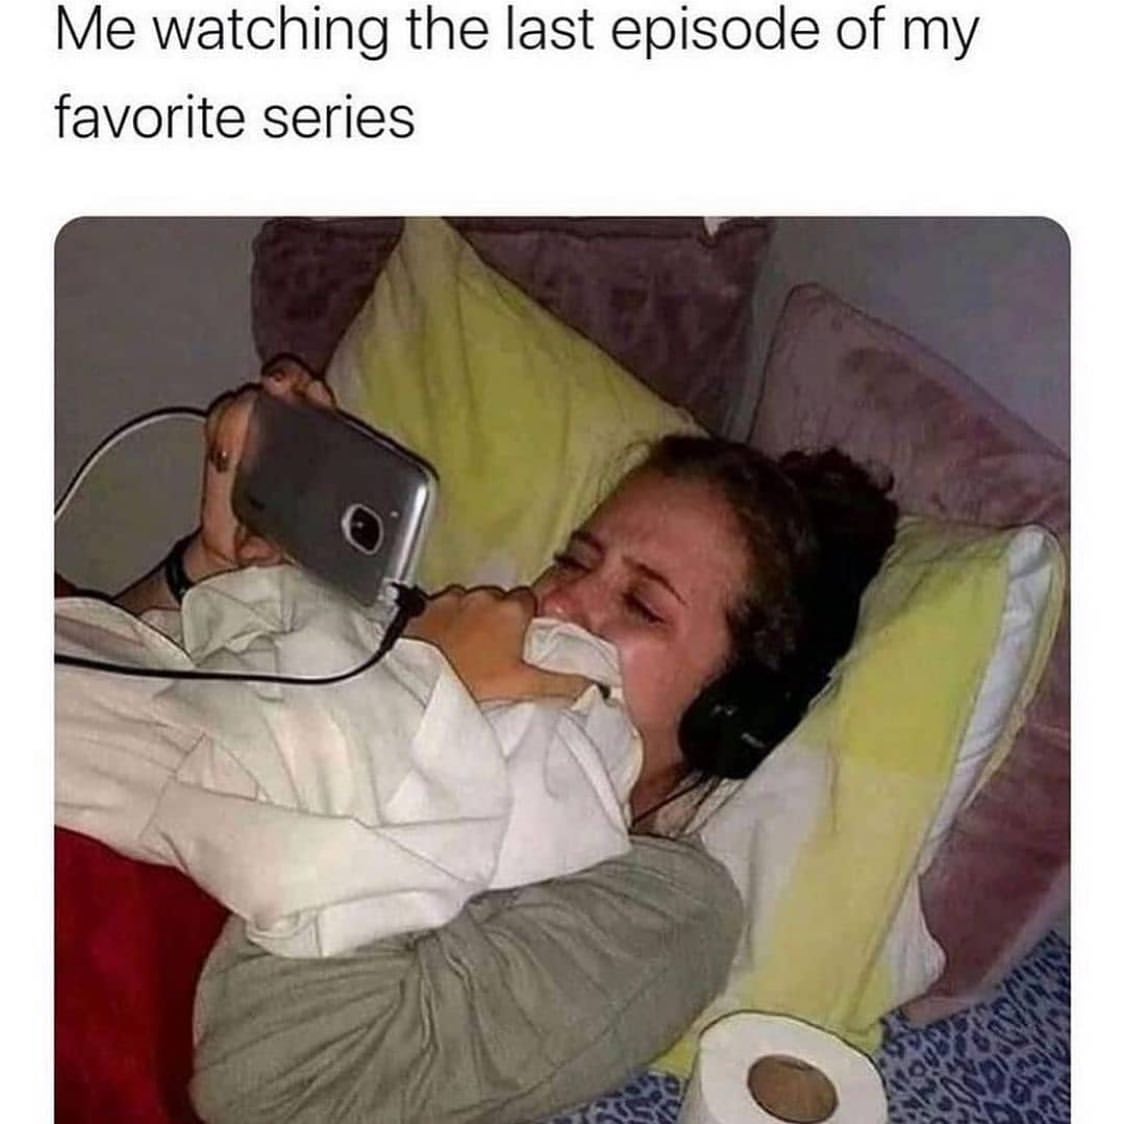 Me watching the last episode of my favorite series. - Funny